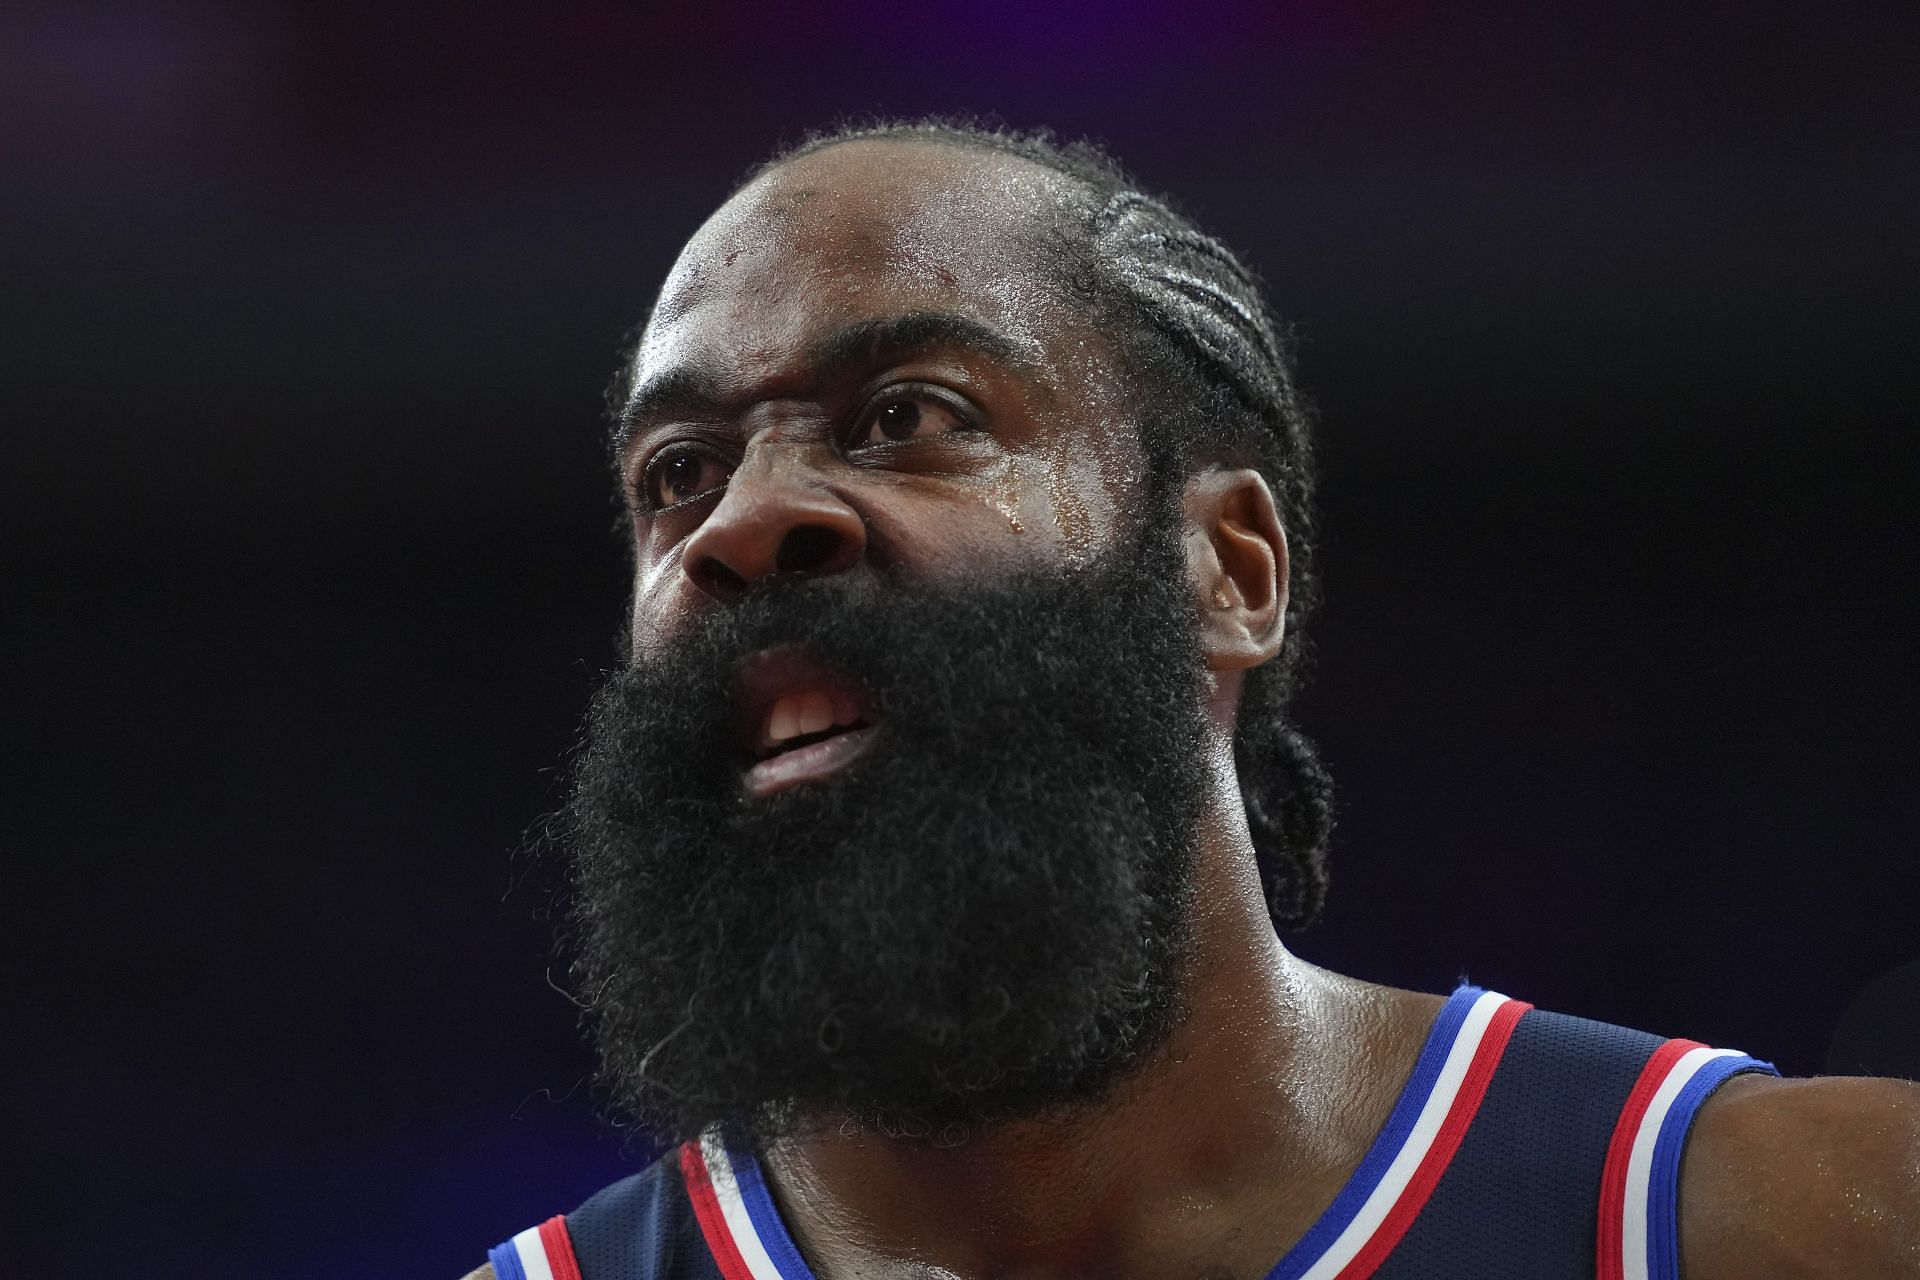 James Harden is feeling the hype as March Madness begins..